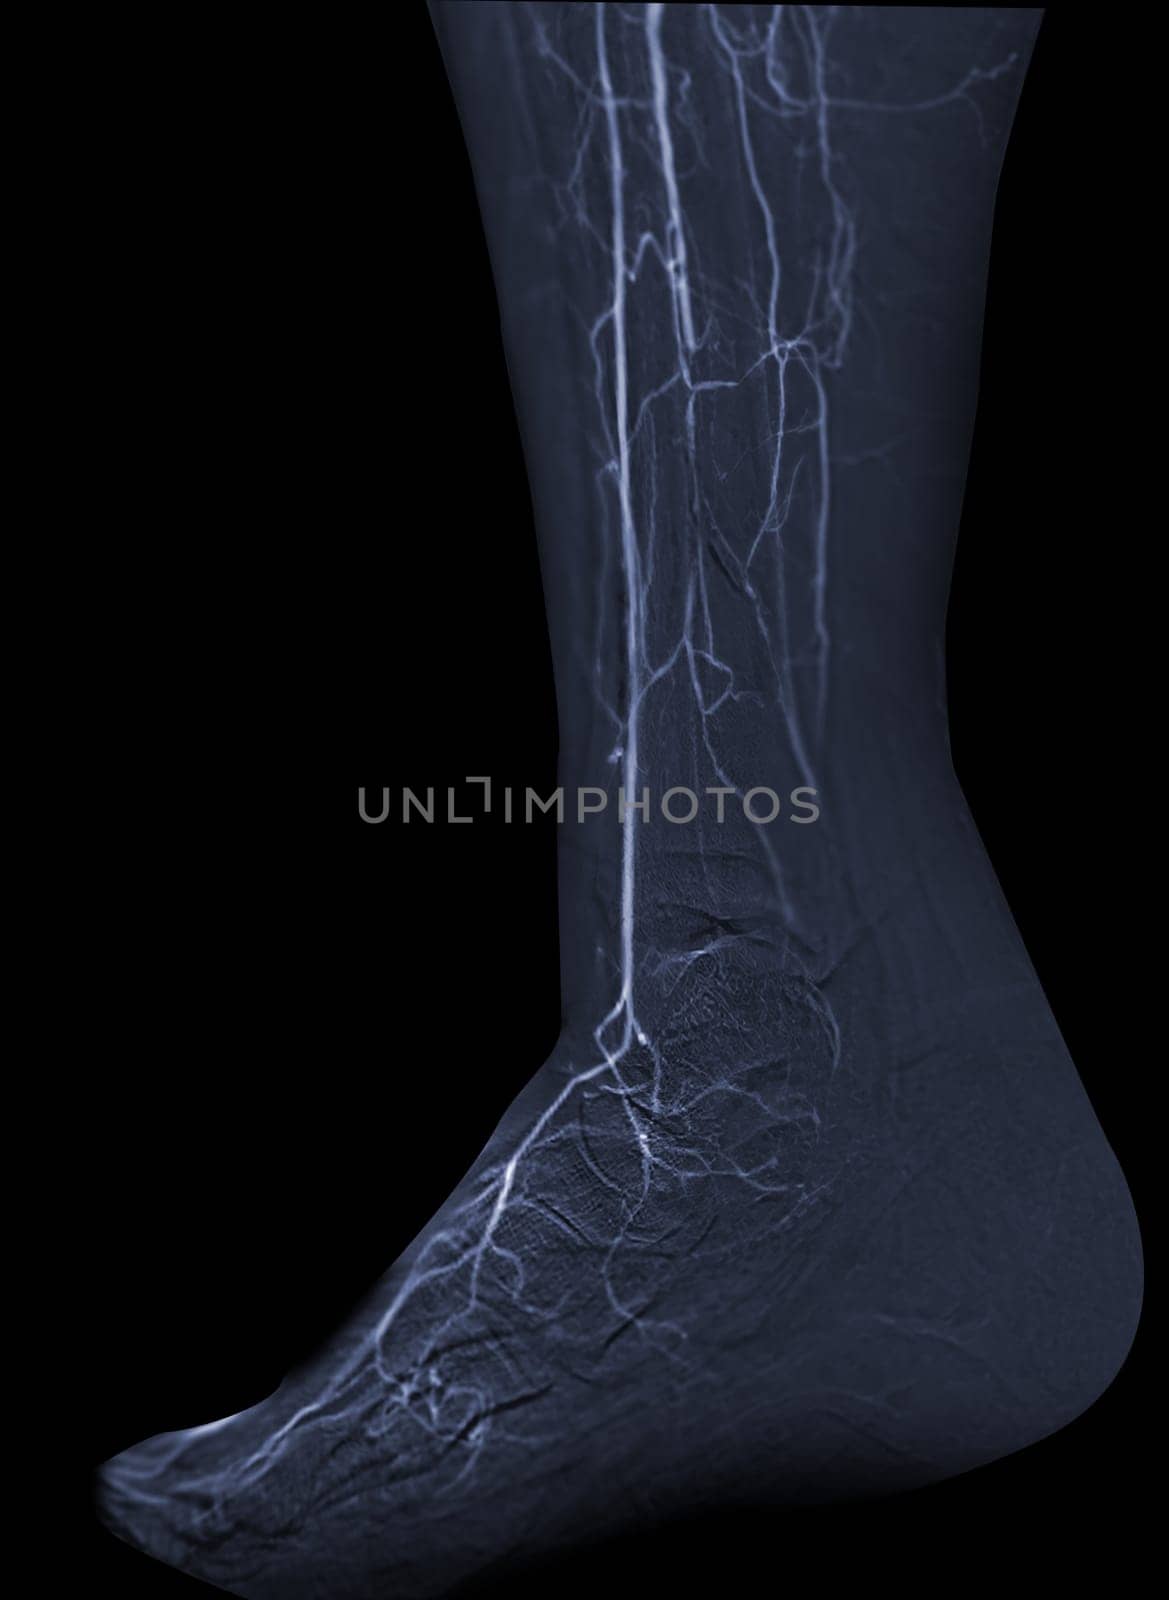 Femoral artery angiogram or angiography  at lower extremity area.